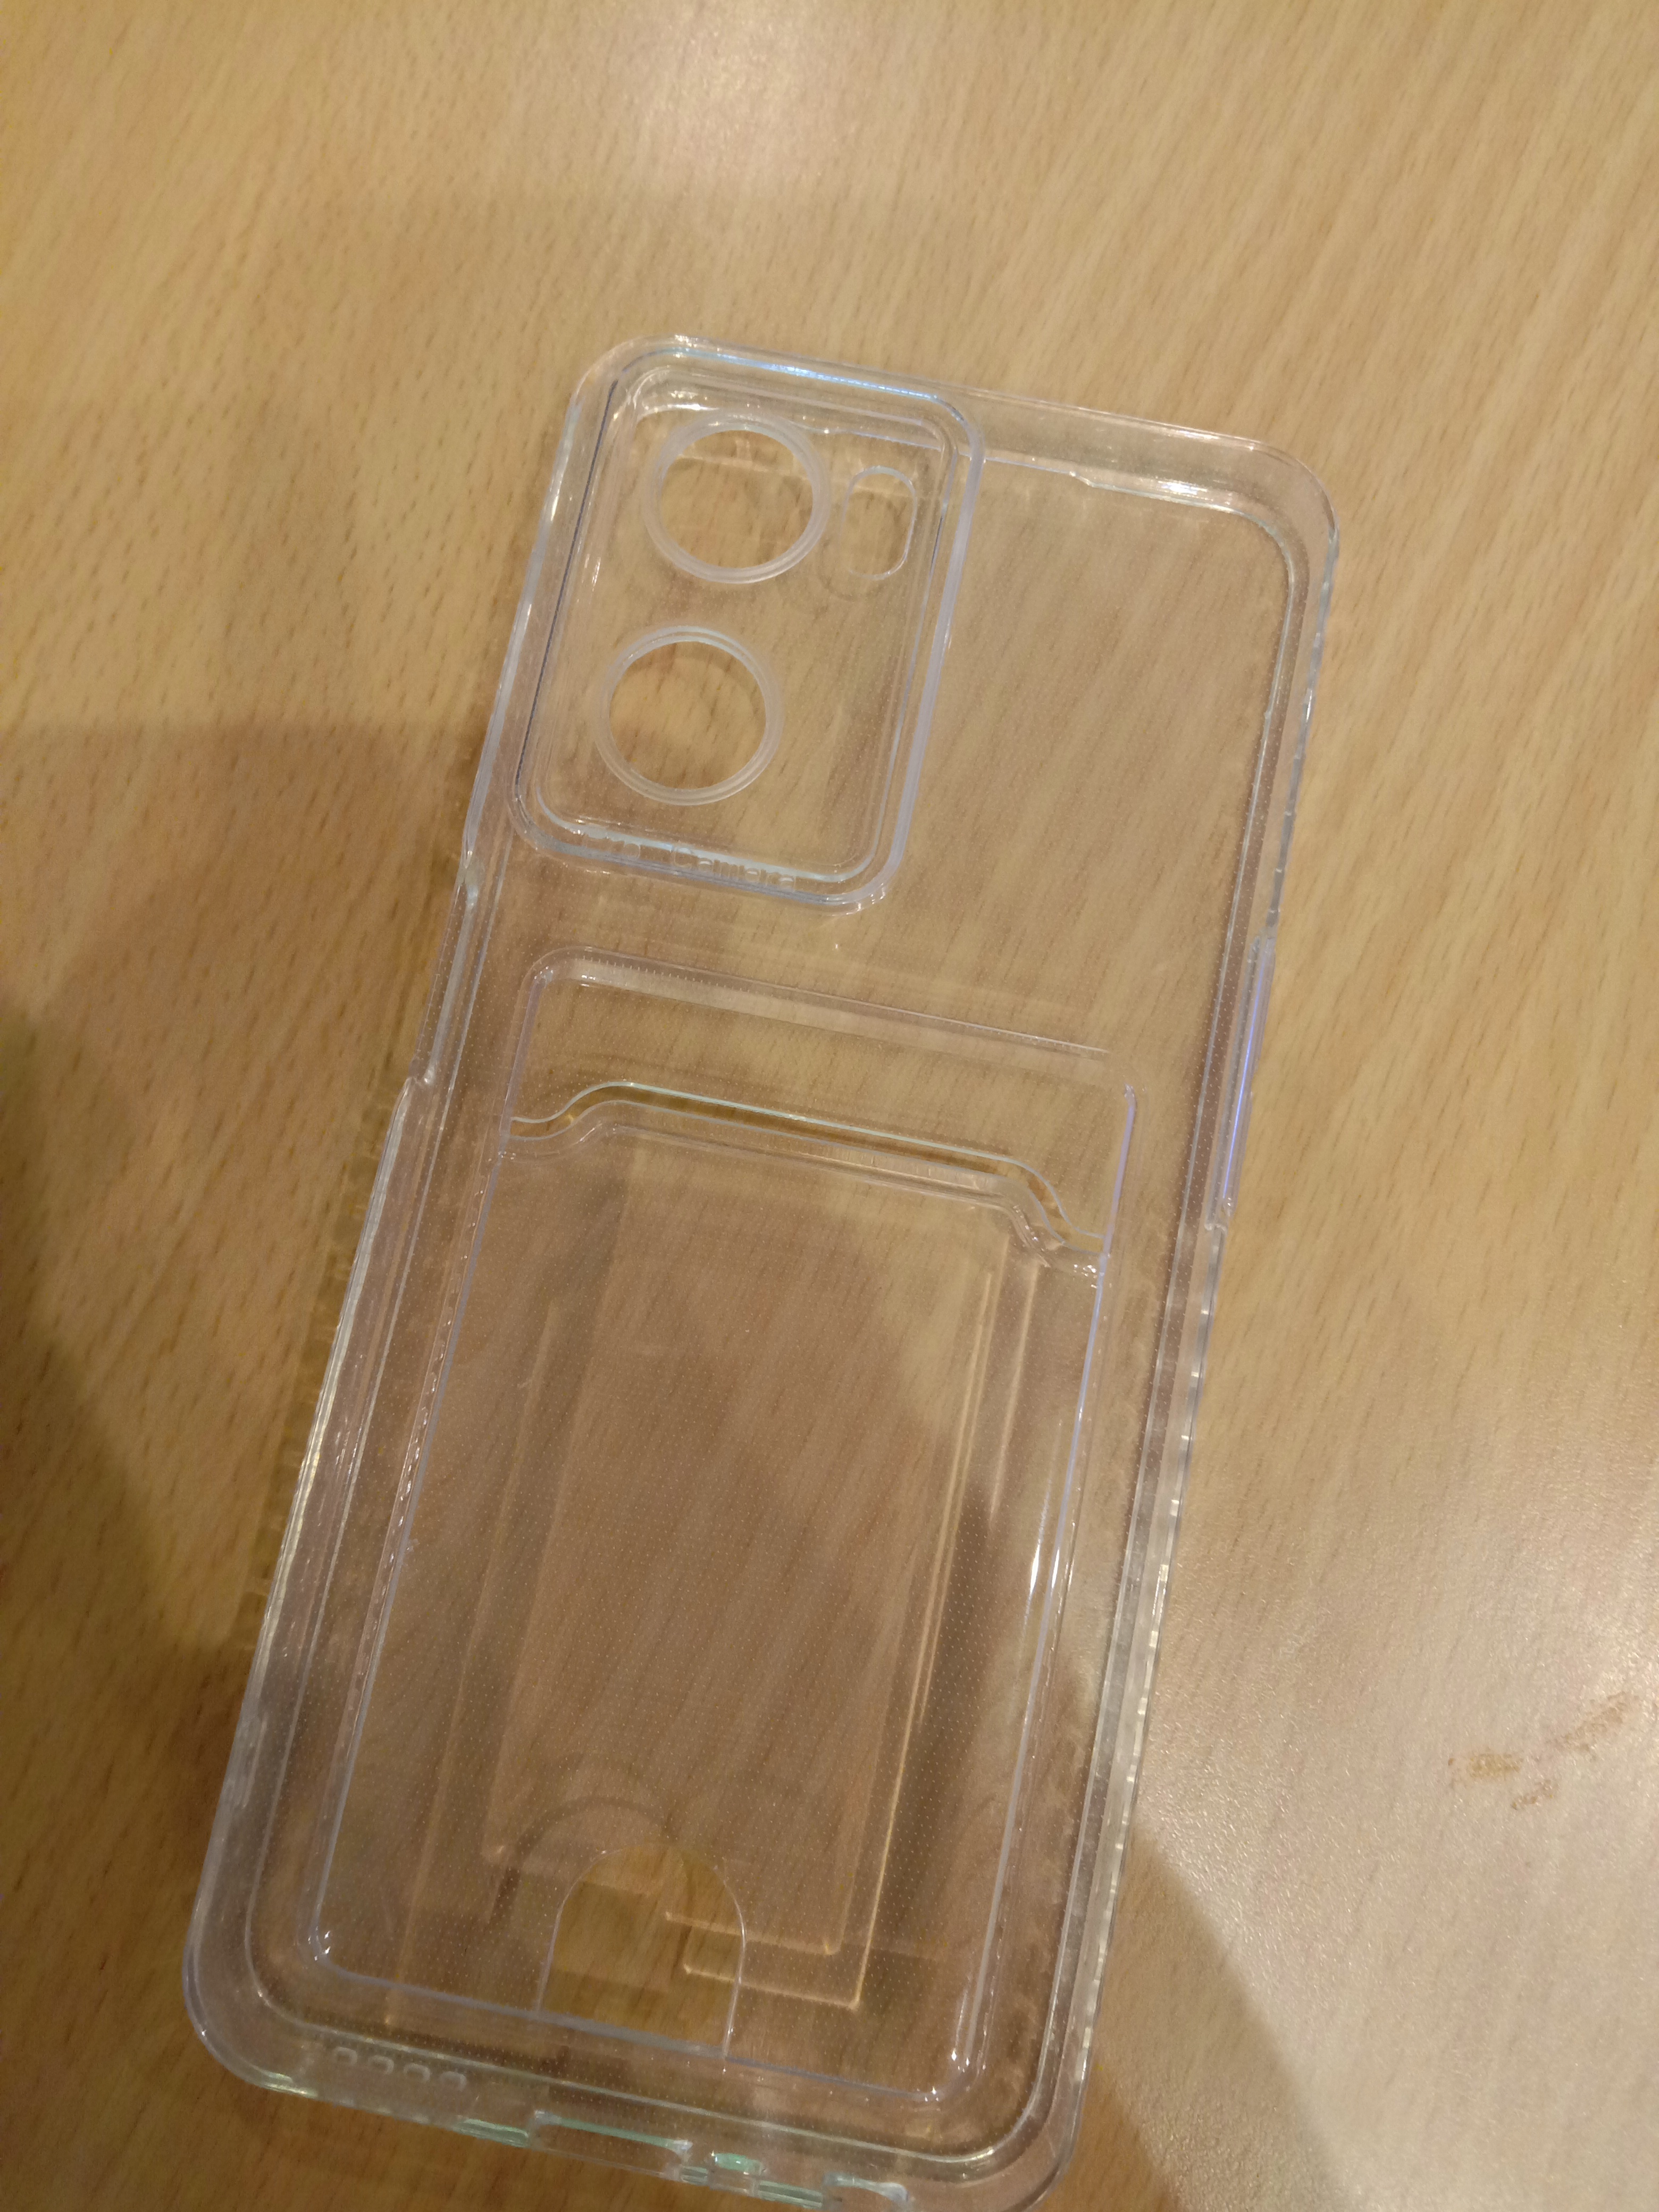 Clear case and cartoon cases